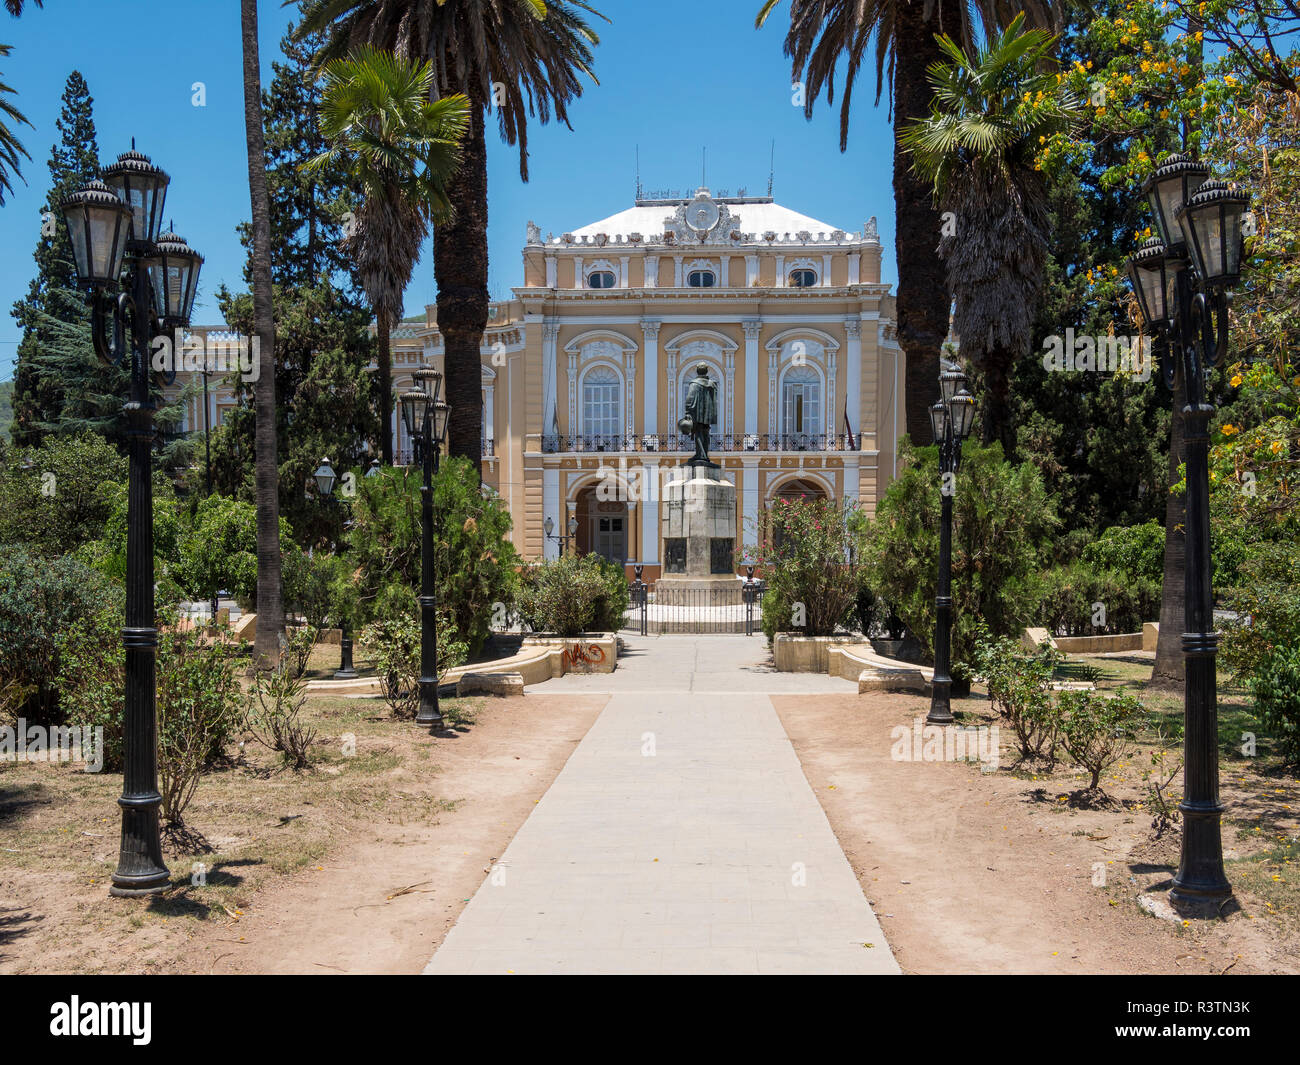 City palace. Town of Salta, located in the foothills of the Andes. South America, Argentina (Editorial Use Only) Stock Photo